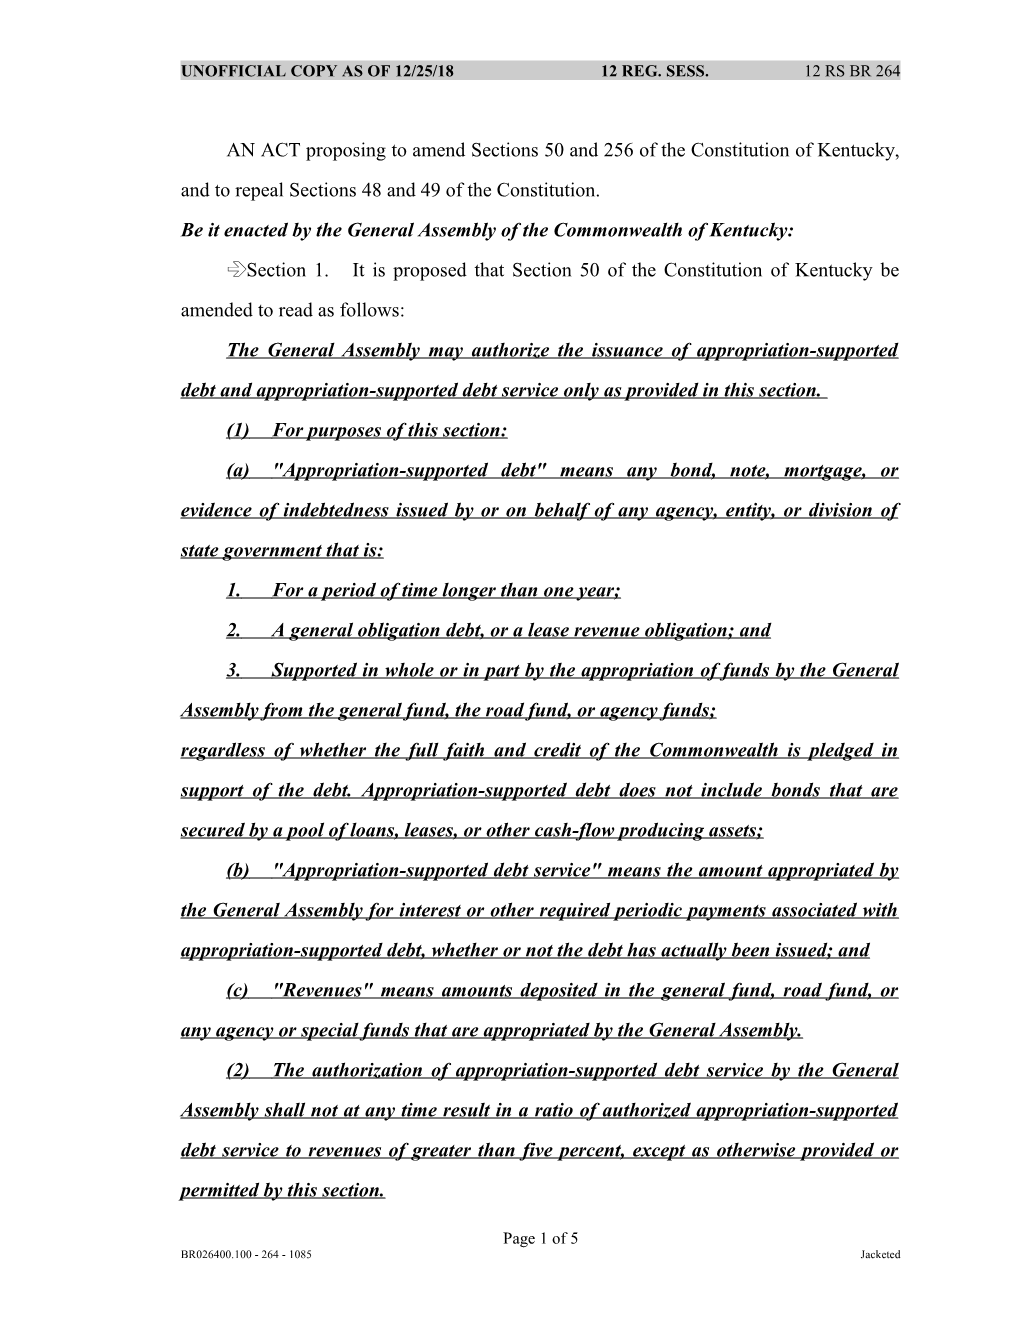 AN ACT Proposing to Amend Sections 50 and 256 of the Constitution of Kentucky, and to Repeal